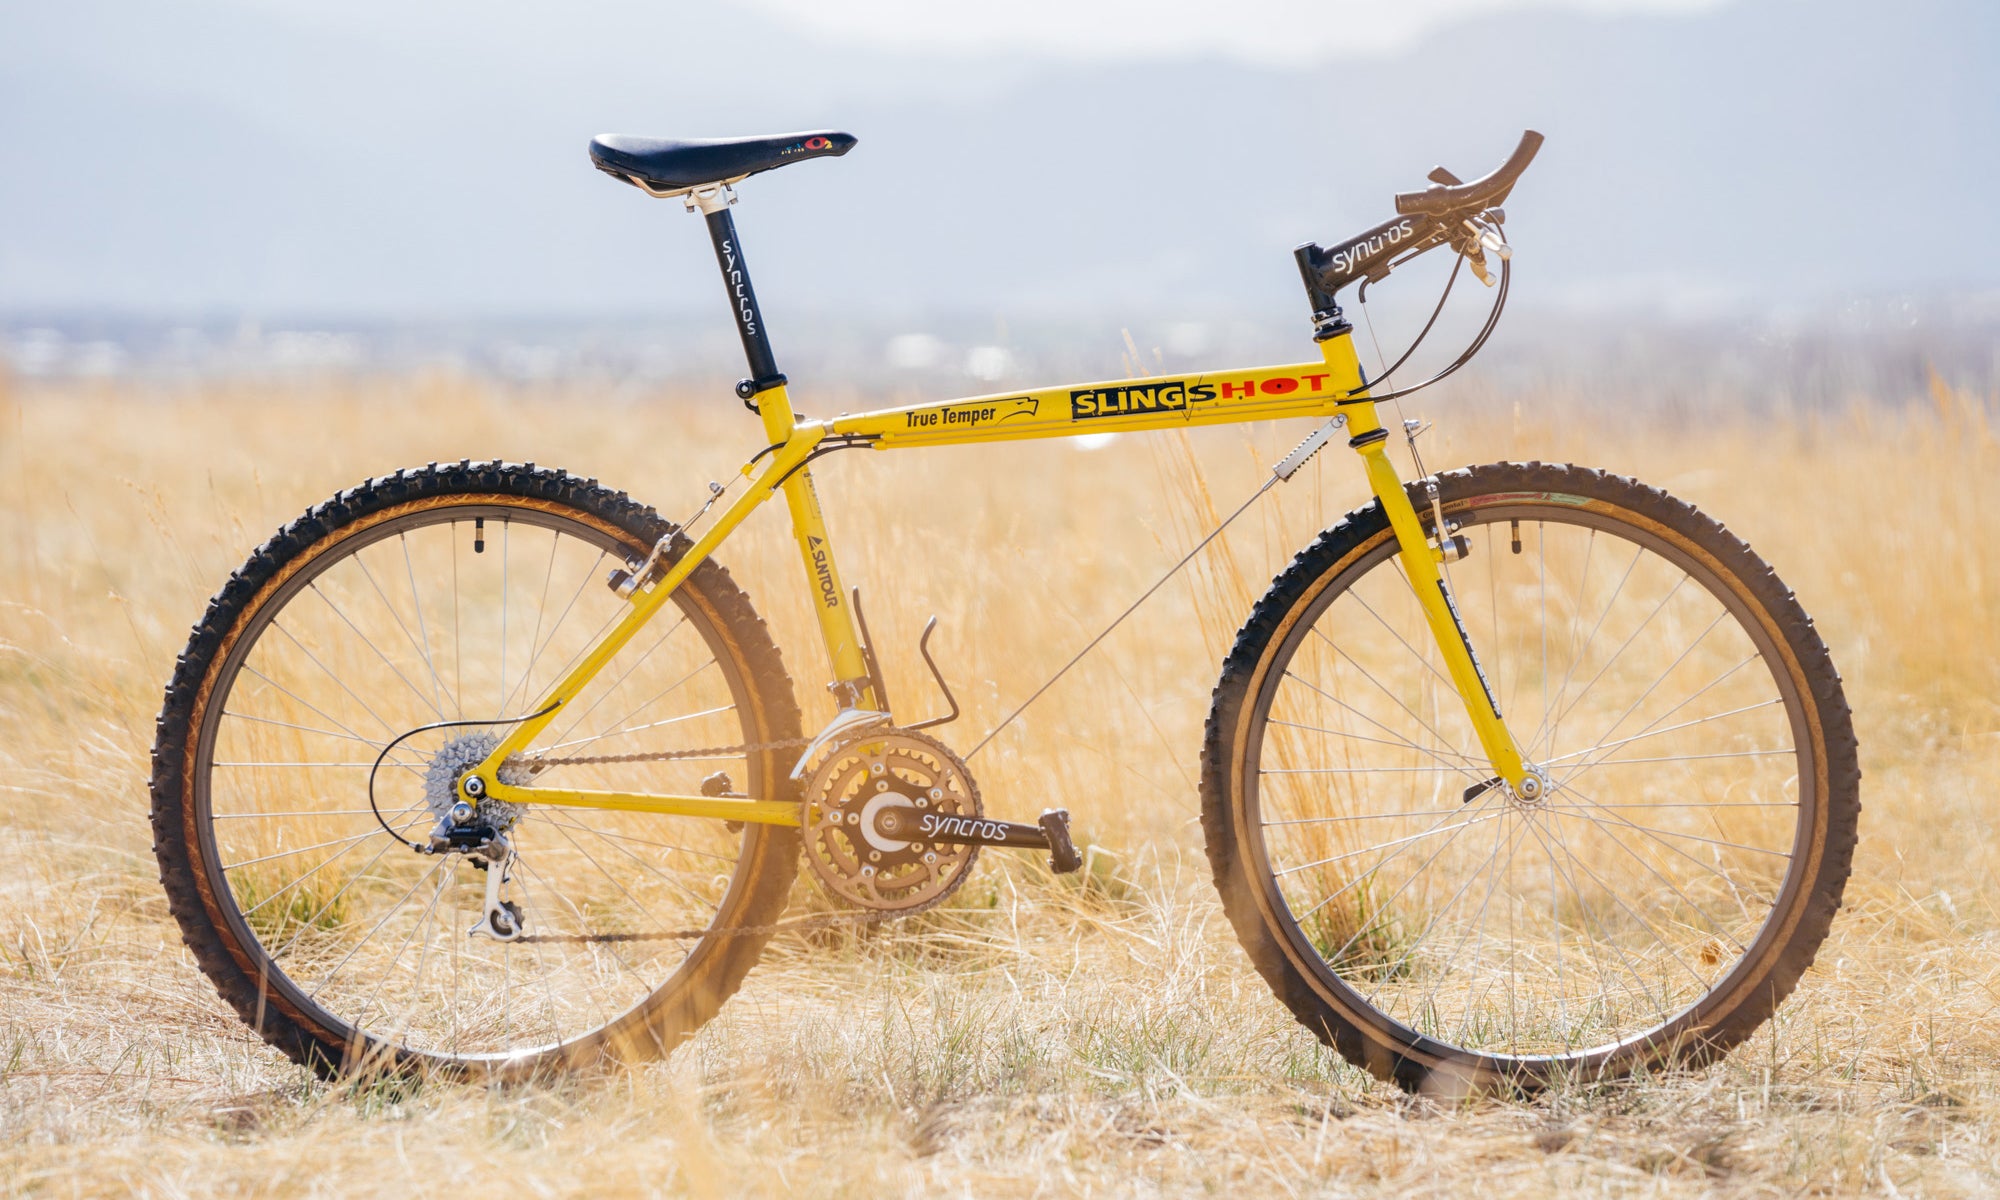 From the Vault: 1992 Slingshot MTB, "The Flexible Bicycle"